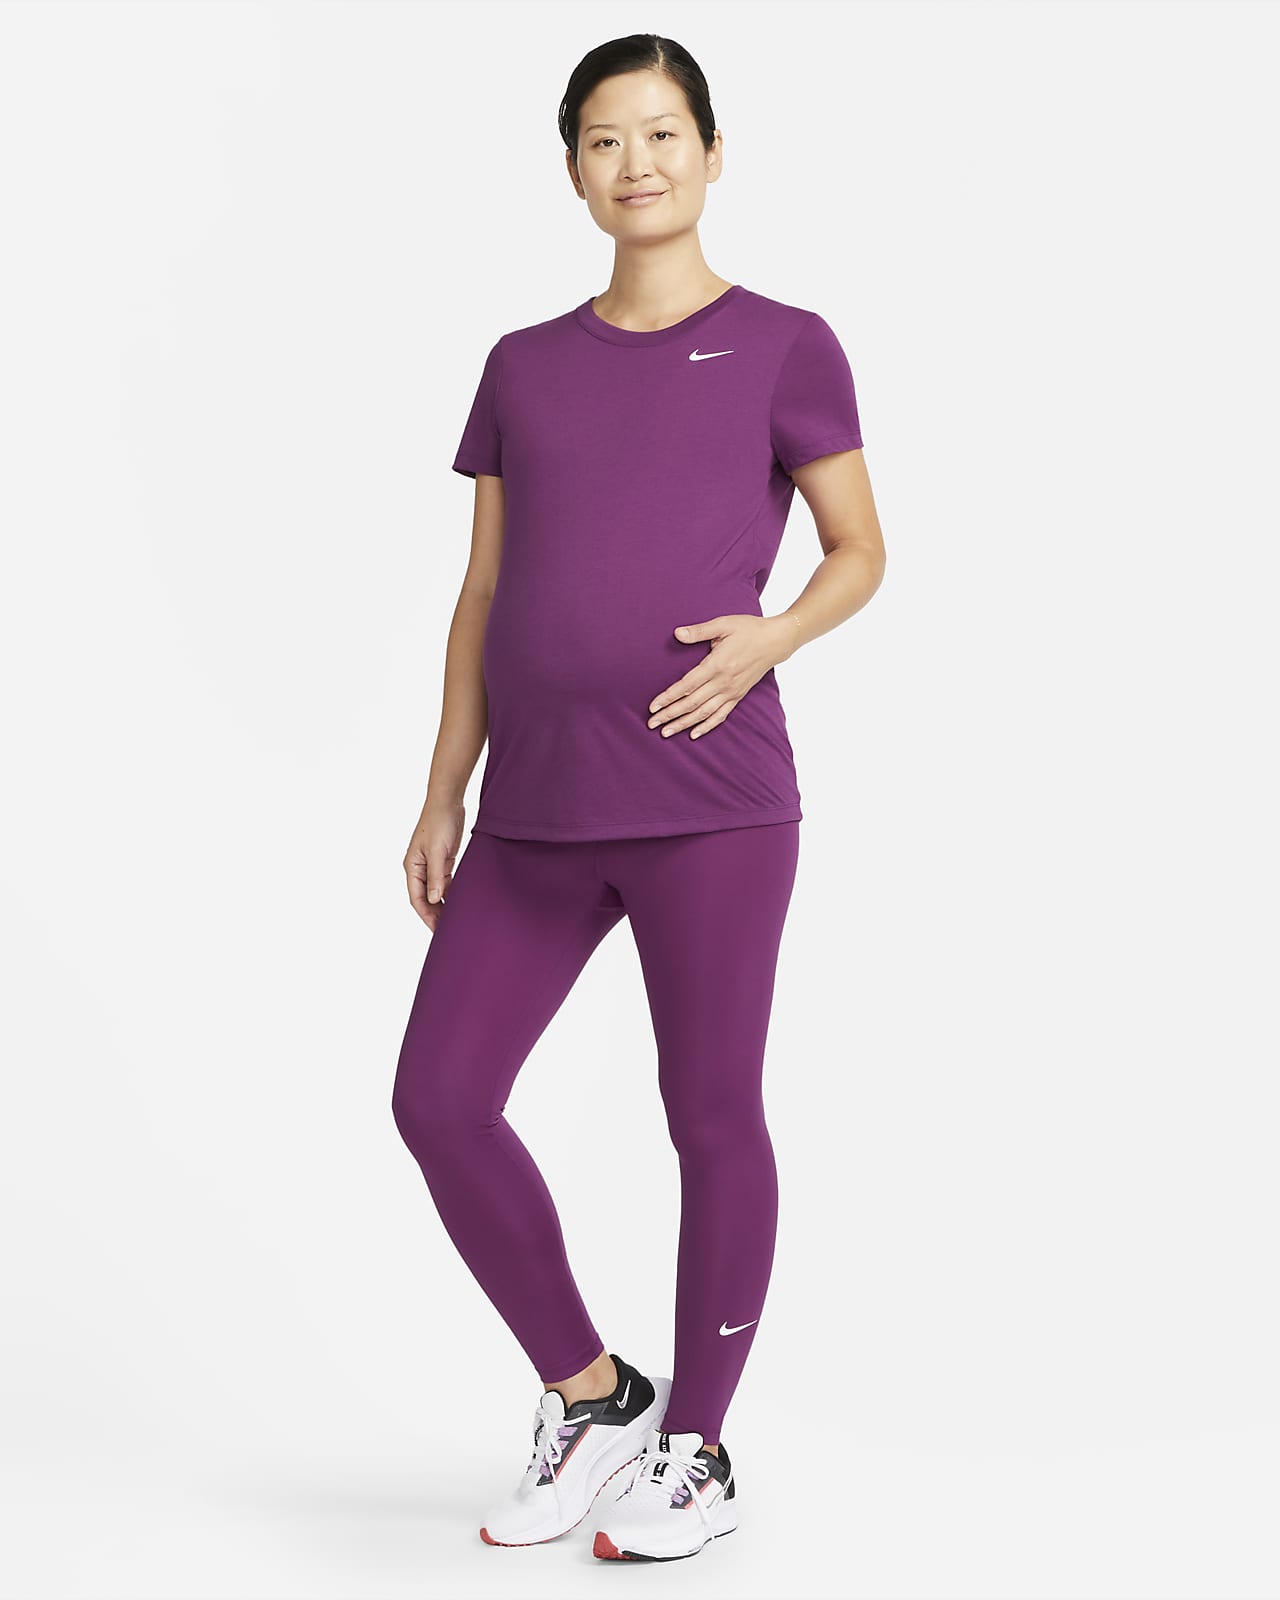 Nike One Maternity Leggings High Waisted Pants Large Short DH1587 812 Nes  for sale online